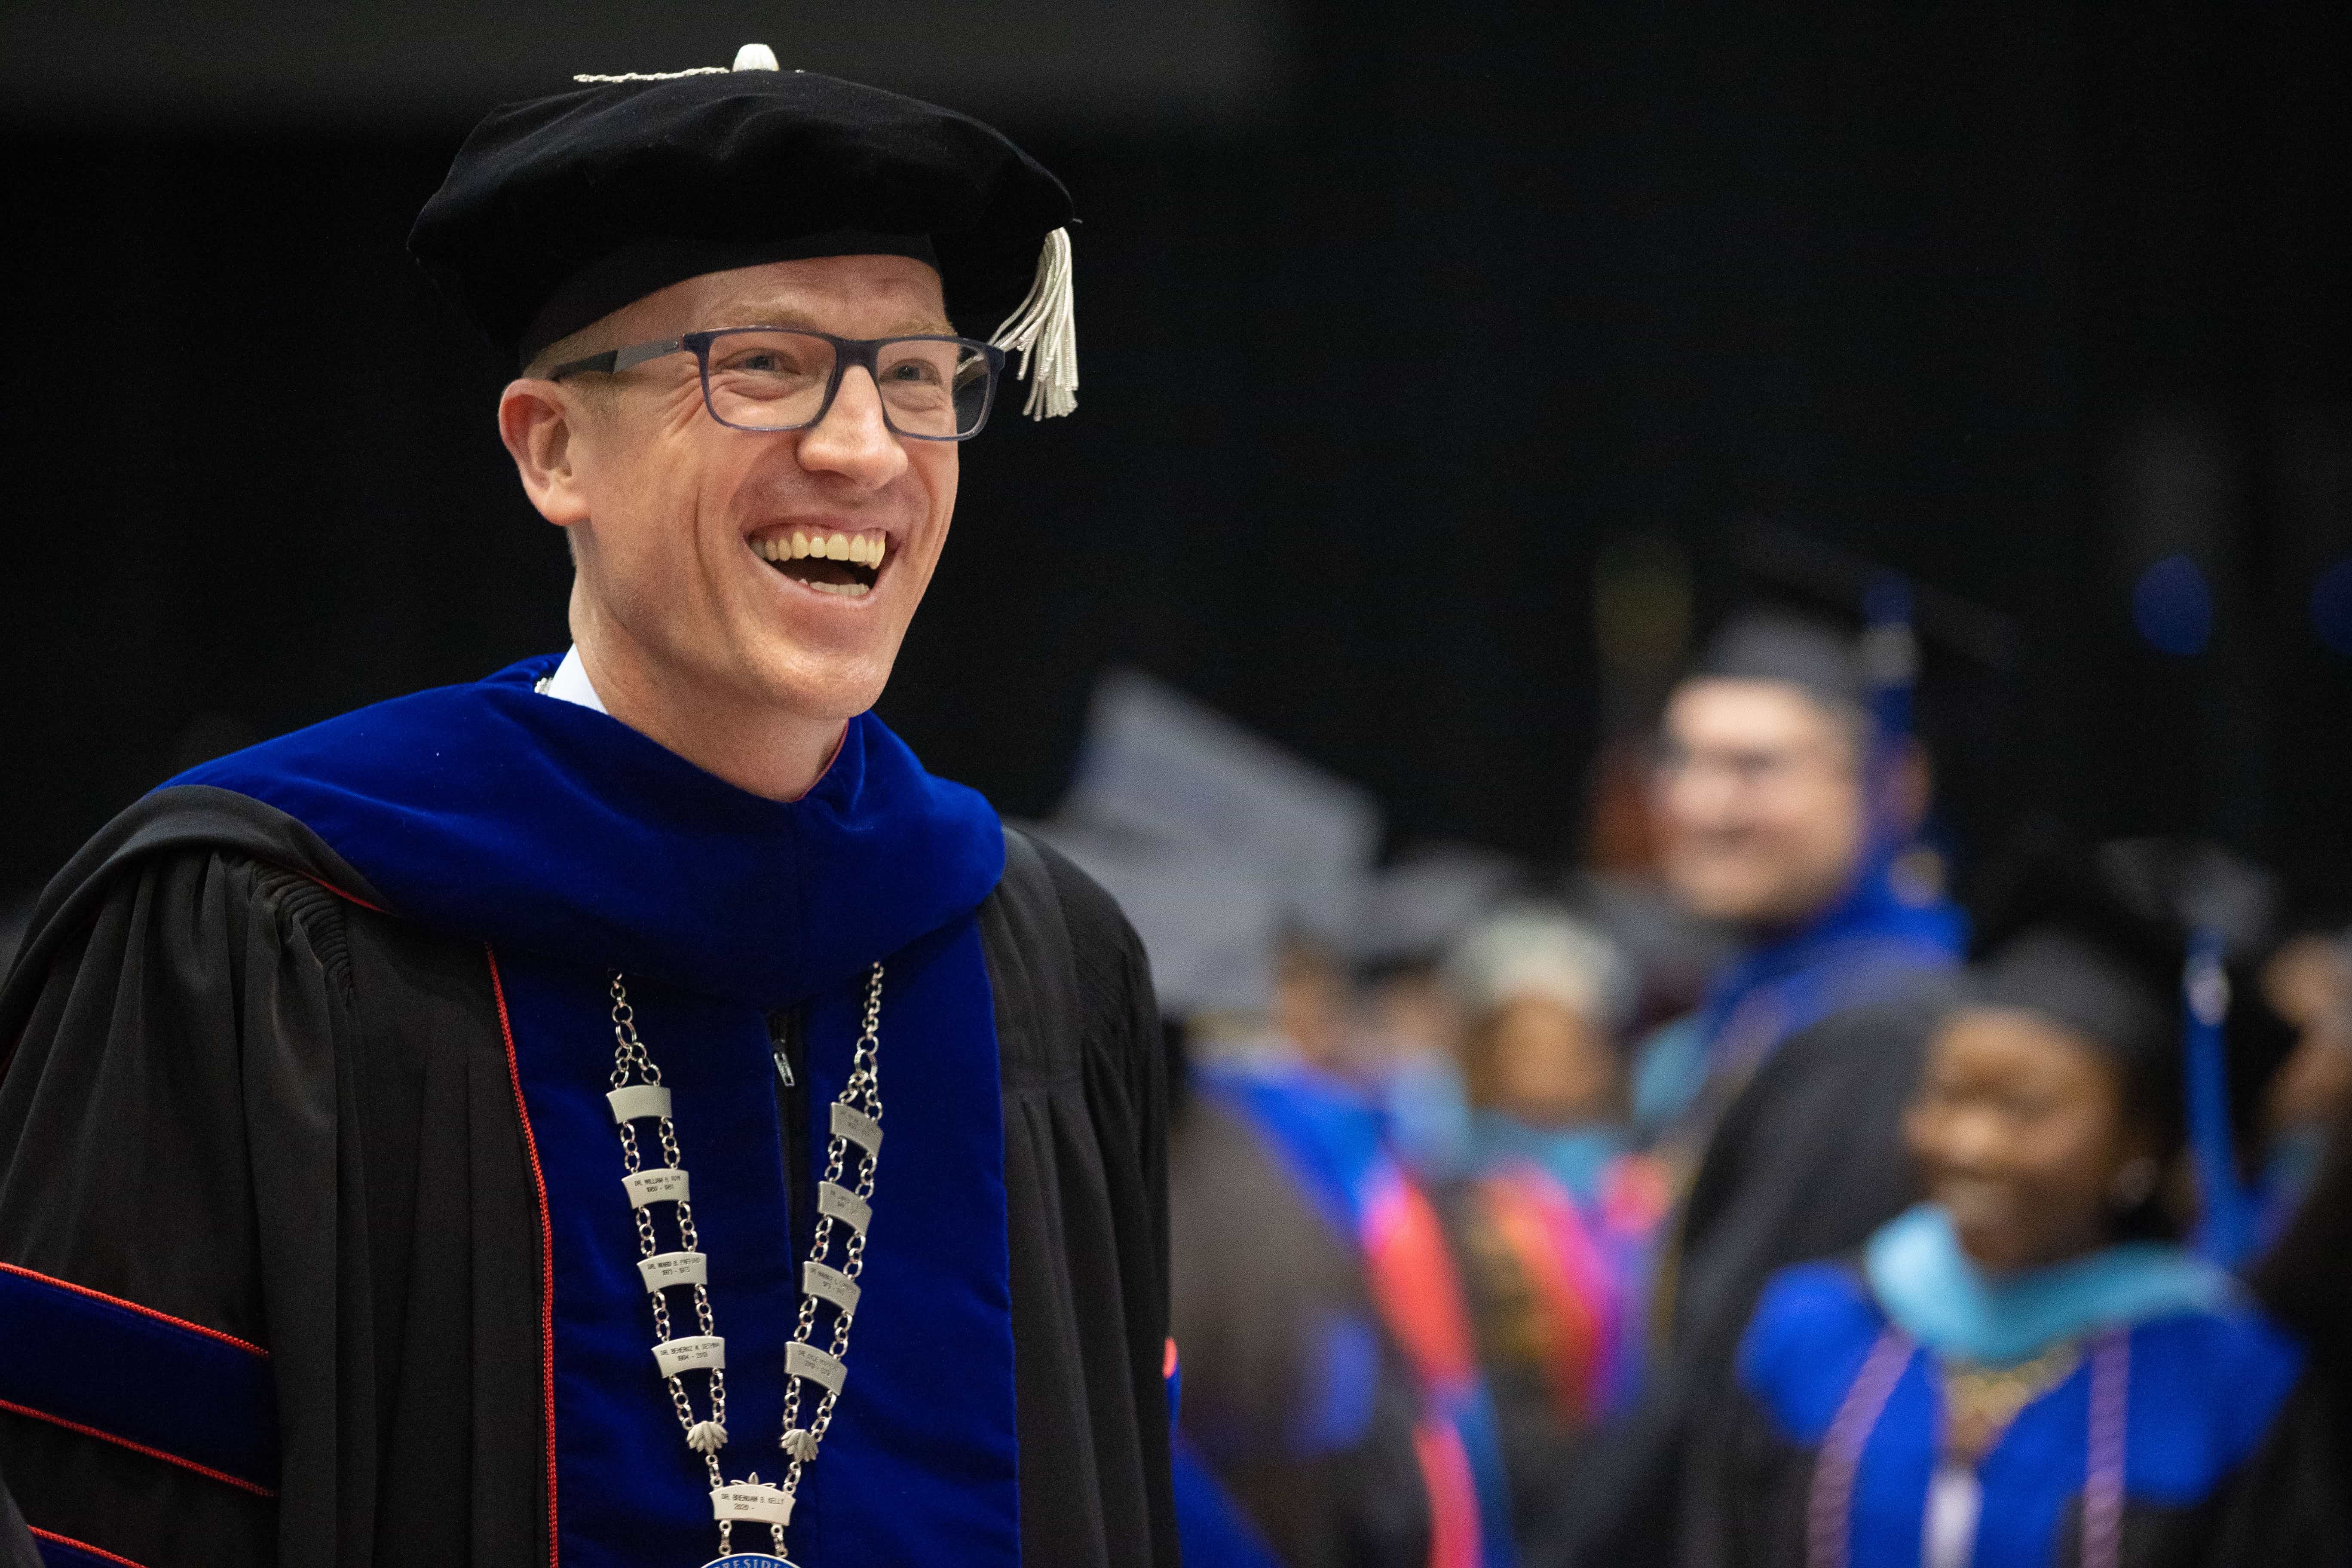 Dr. Kelly smiling at Commencement.